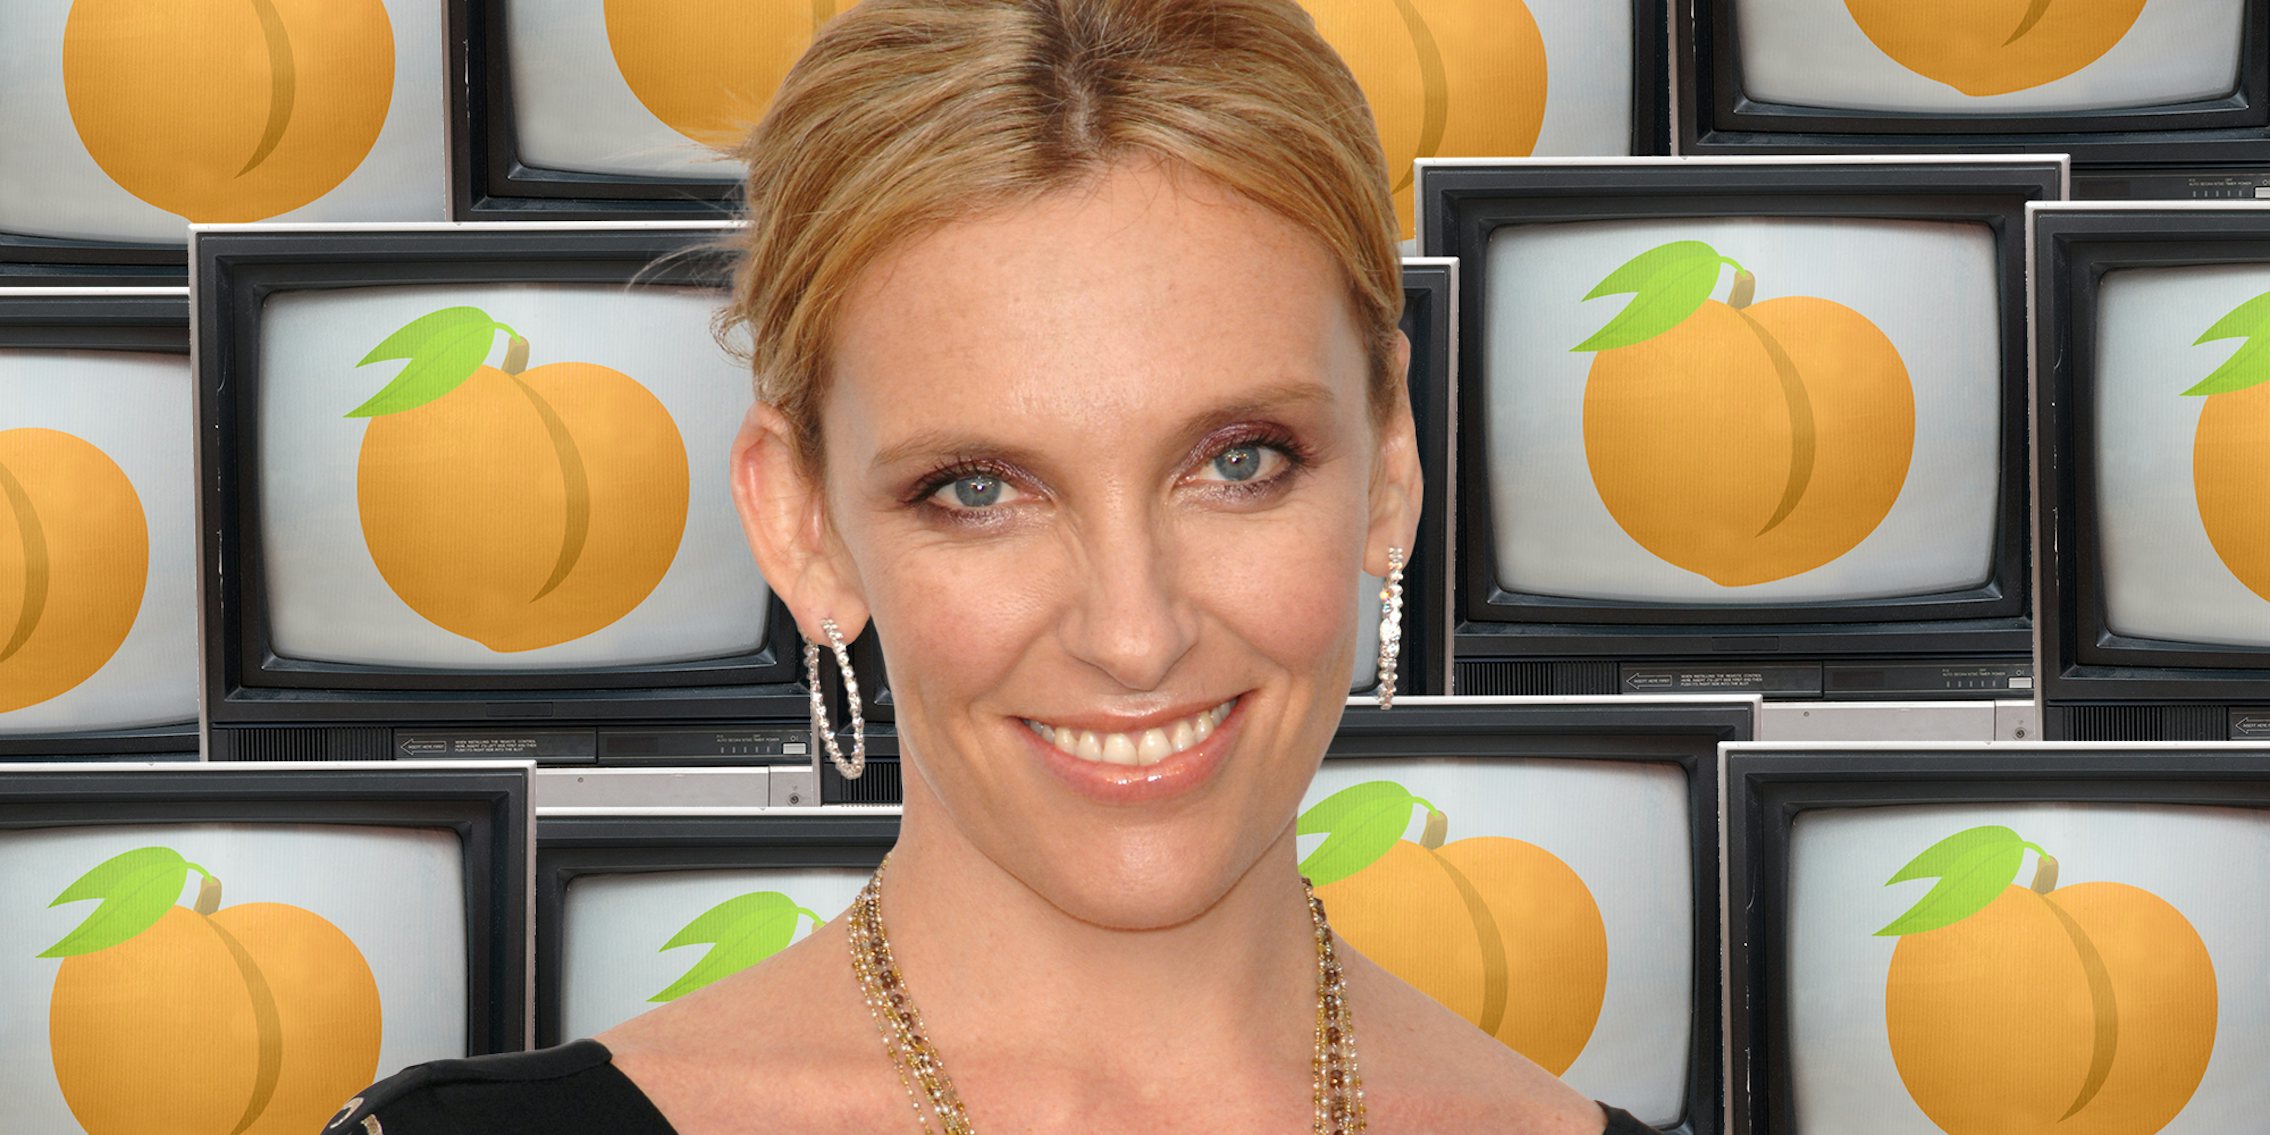 Toni Collette over background of televisions with emoji peaches on screen